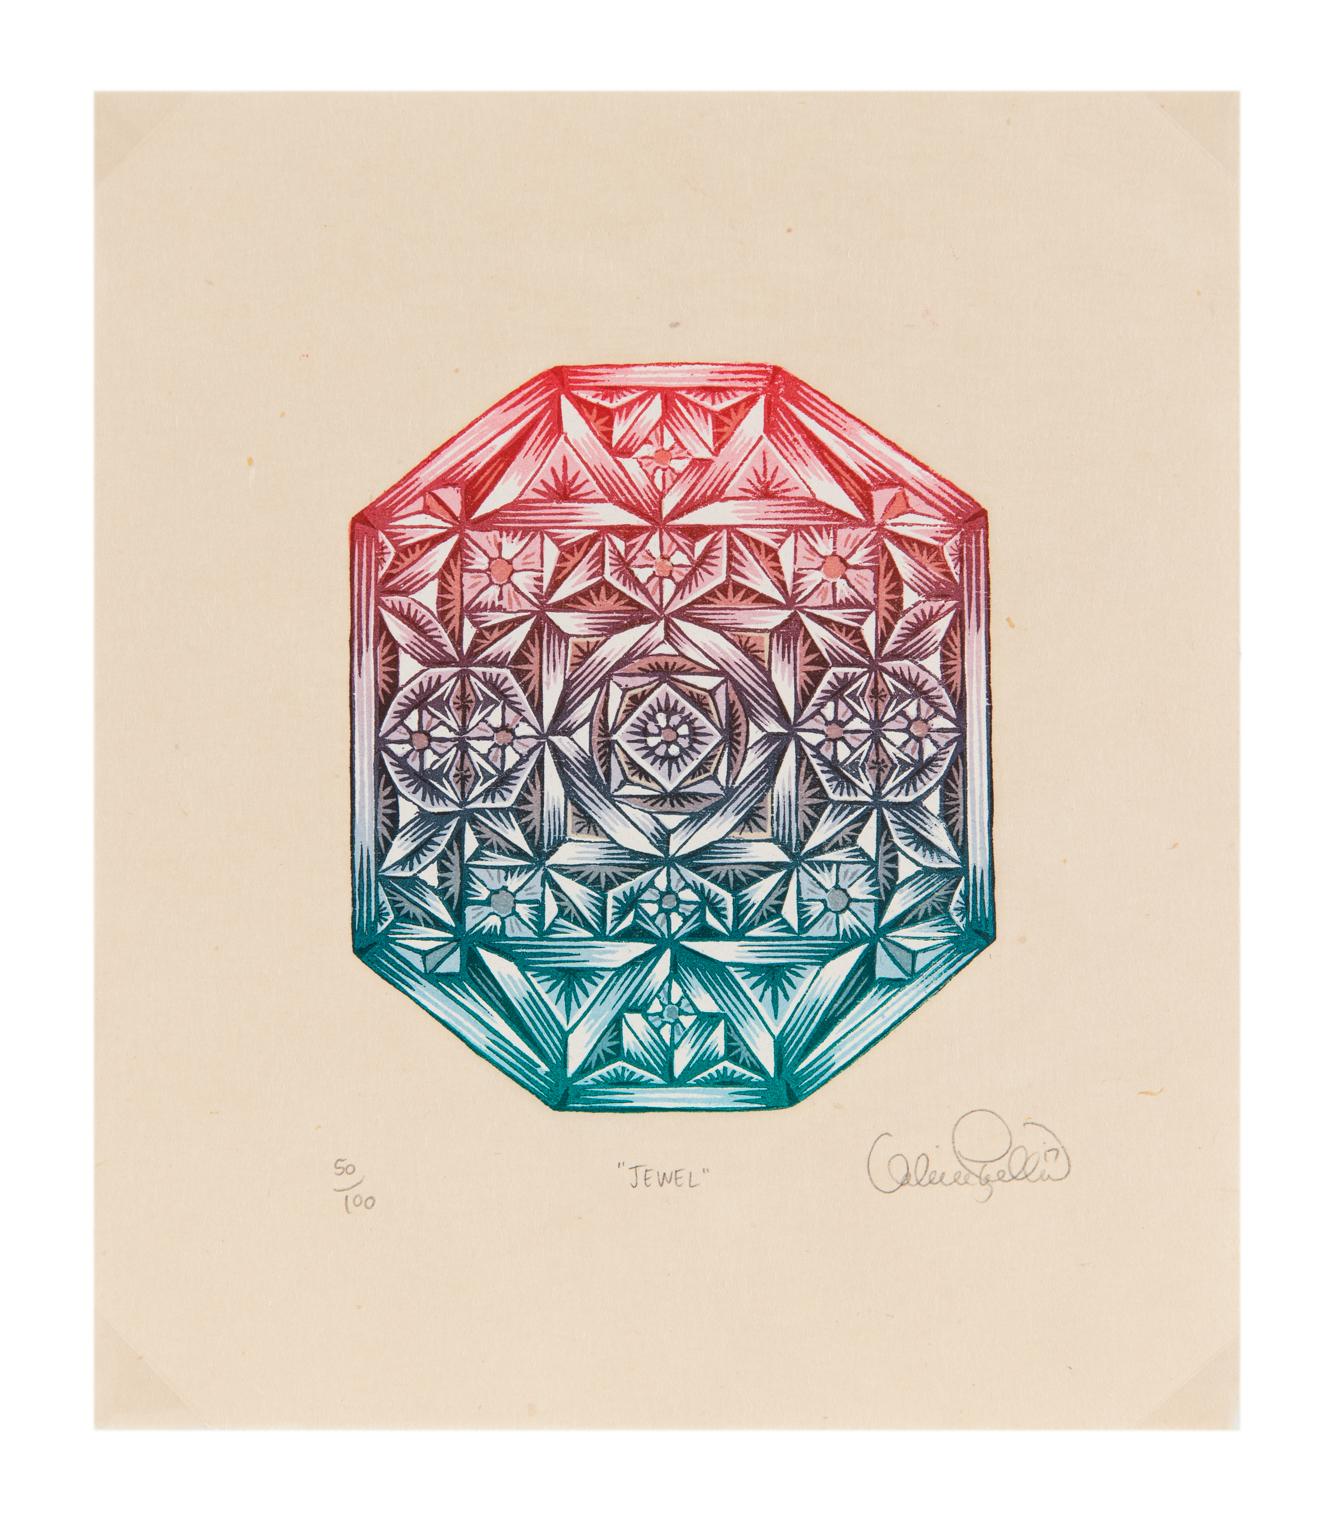 "Jewel" - Small Color Woodcut Print of Faceted Jewel